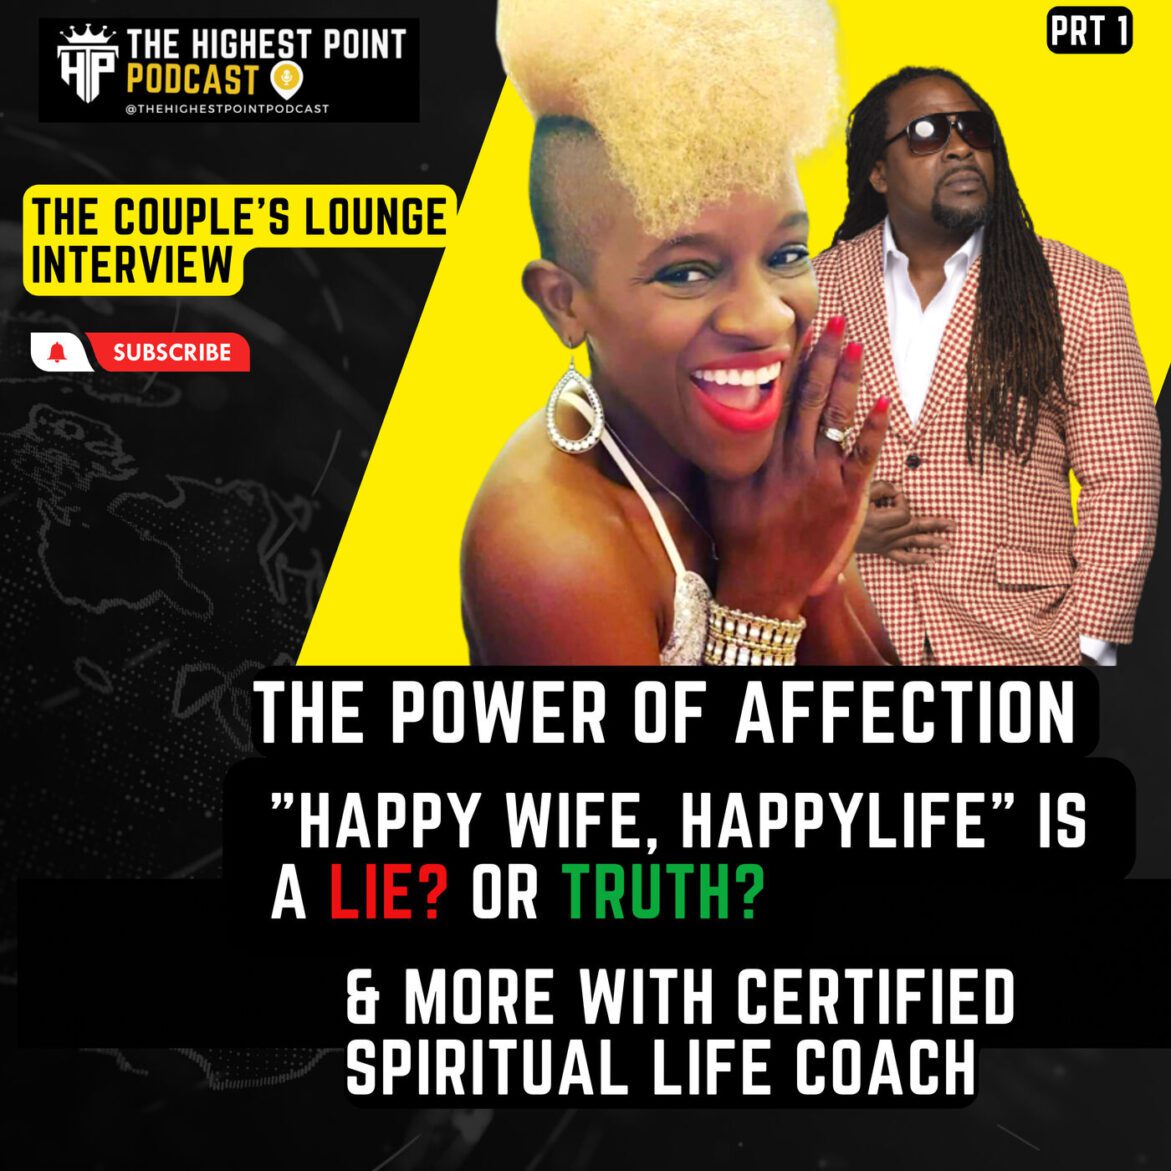 Black Podcasting - The power of affection, Happy wife, happy life is a lie?  Marriage is not one size fit all & more Prt 1 with Certified Life Coach Candace Tuck from The Couple's Lounge